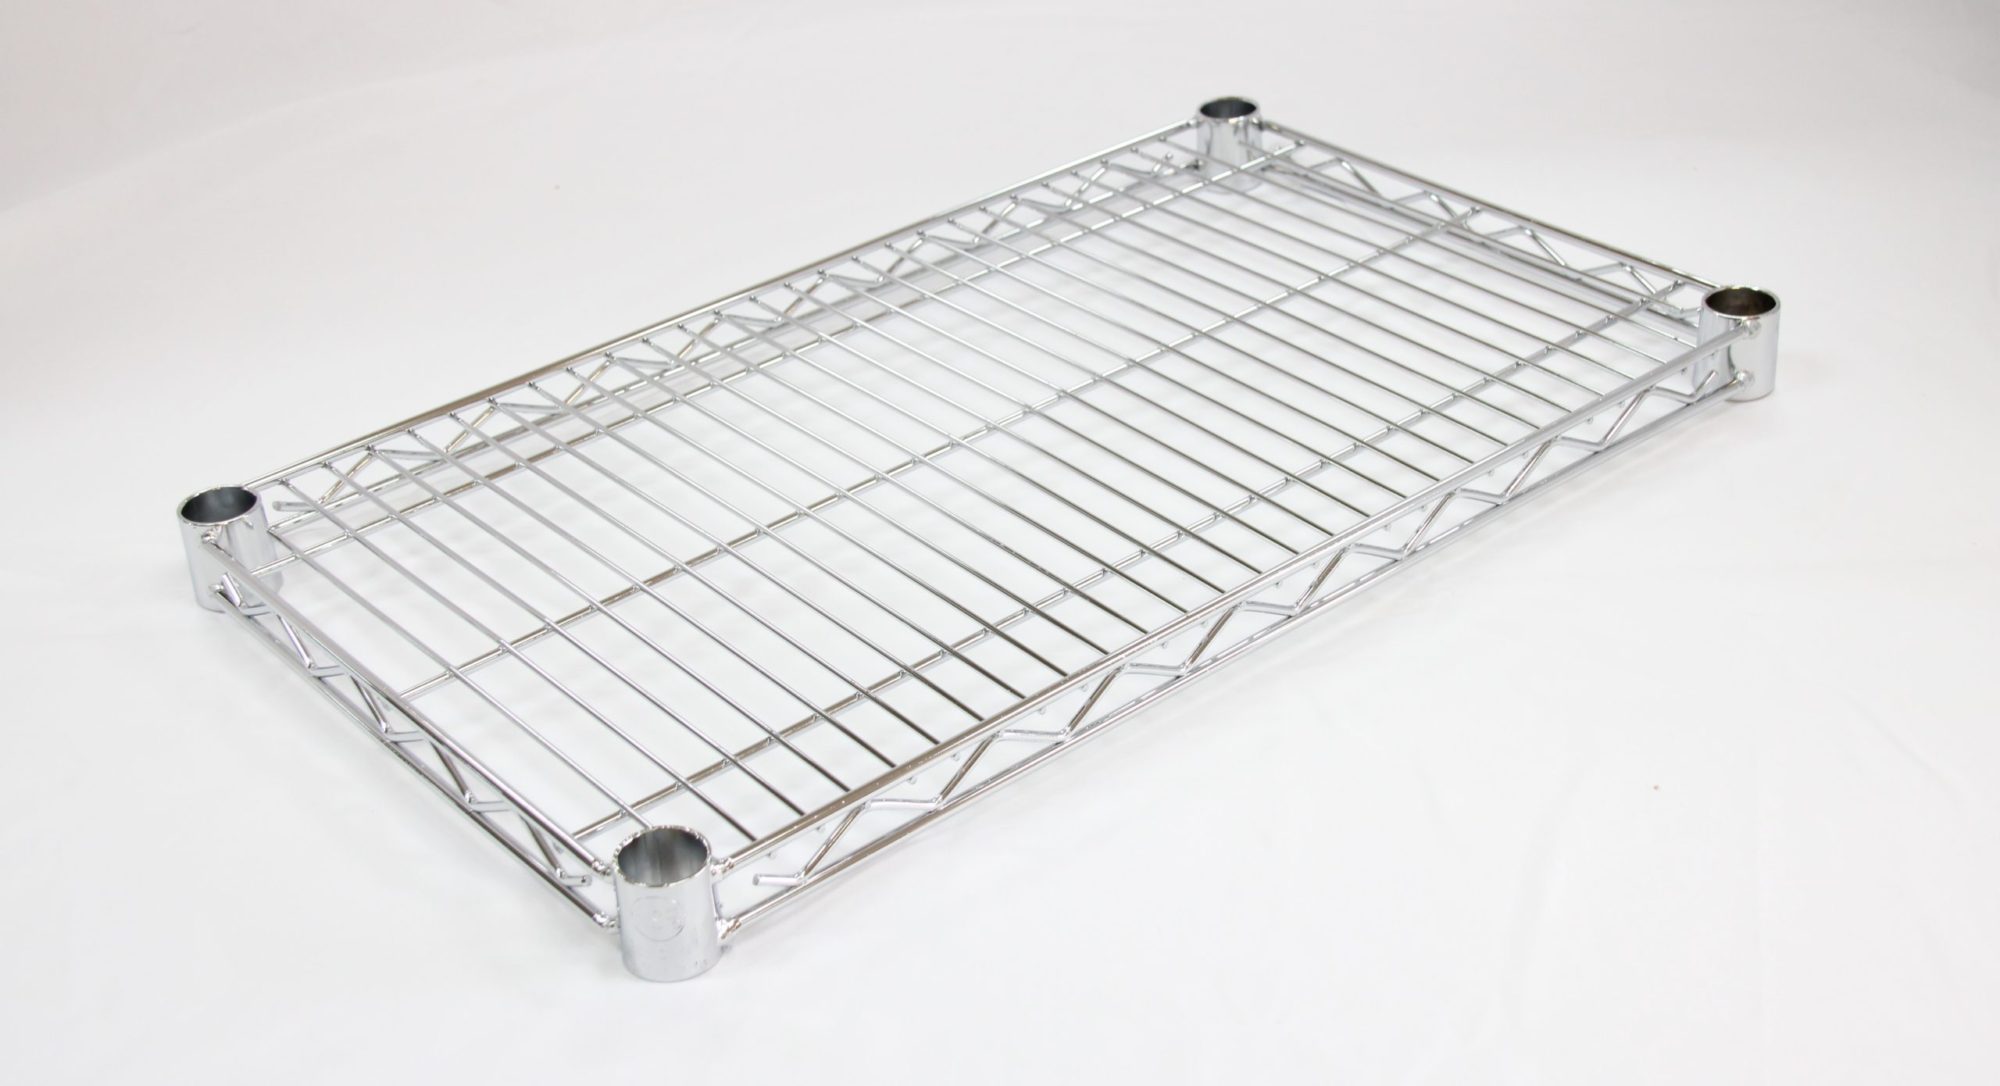 Omcan Wire Mesh Shelving 24" x 72" 20121 Chrome 2 Pack-S2472C